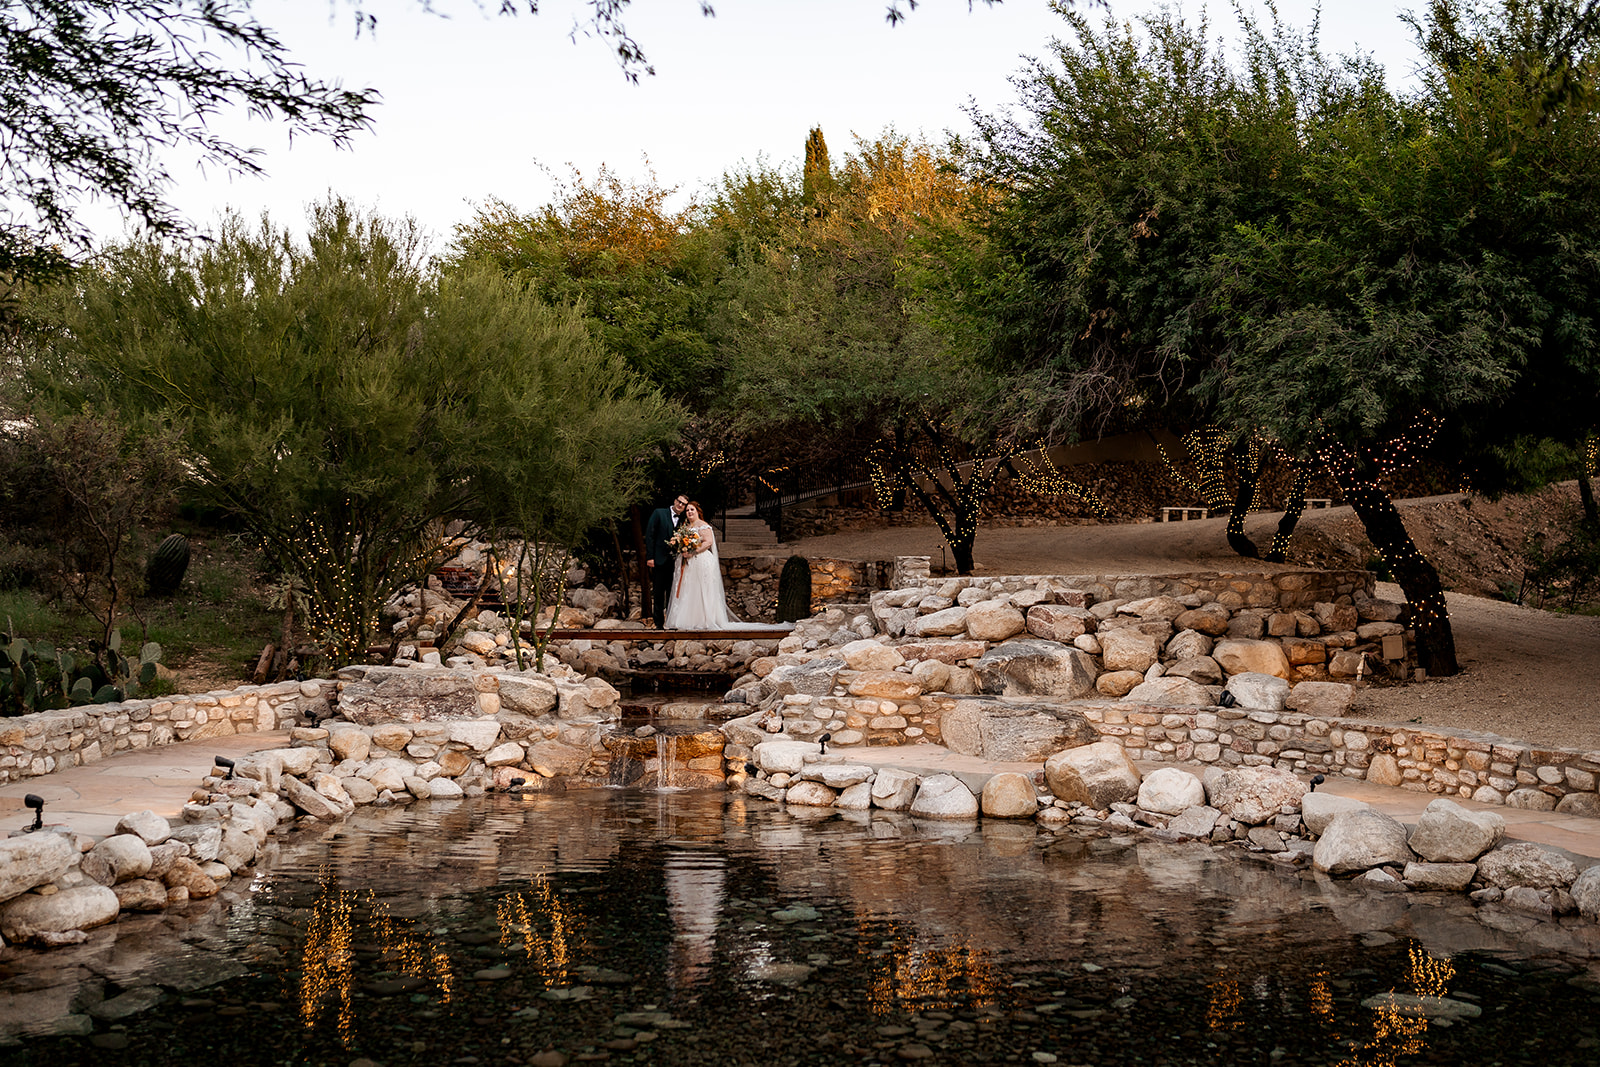 bride and groom posing for wedding photography at saguaro buttes venue pond